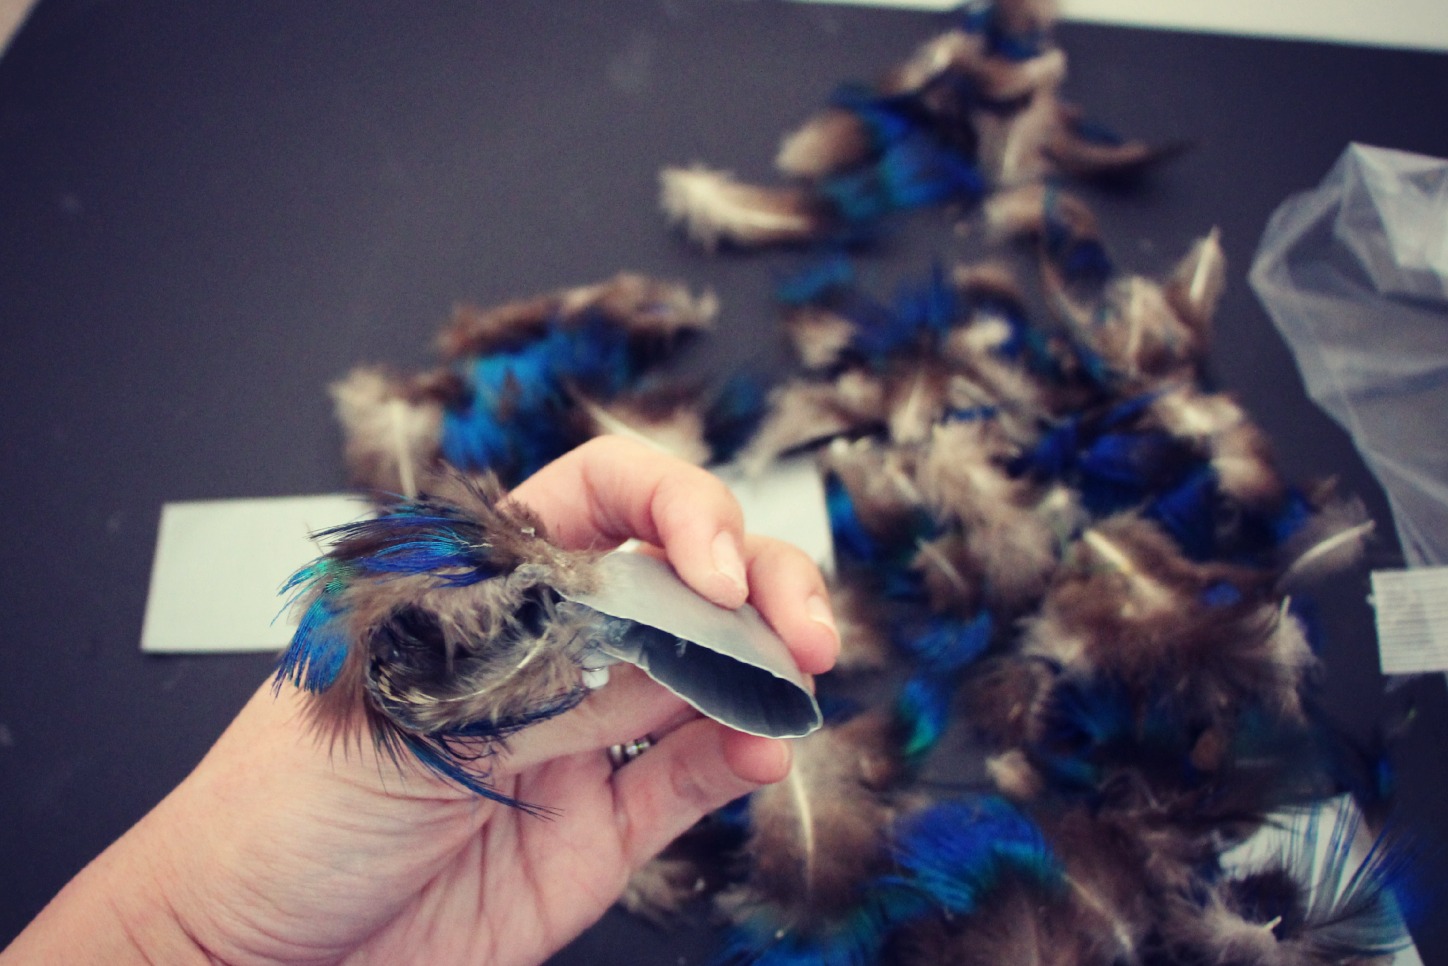 Peacock Feather Bow Shoe Clips